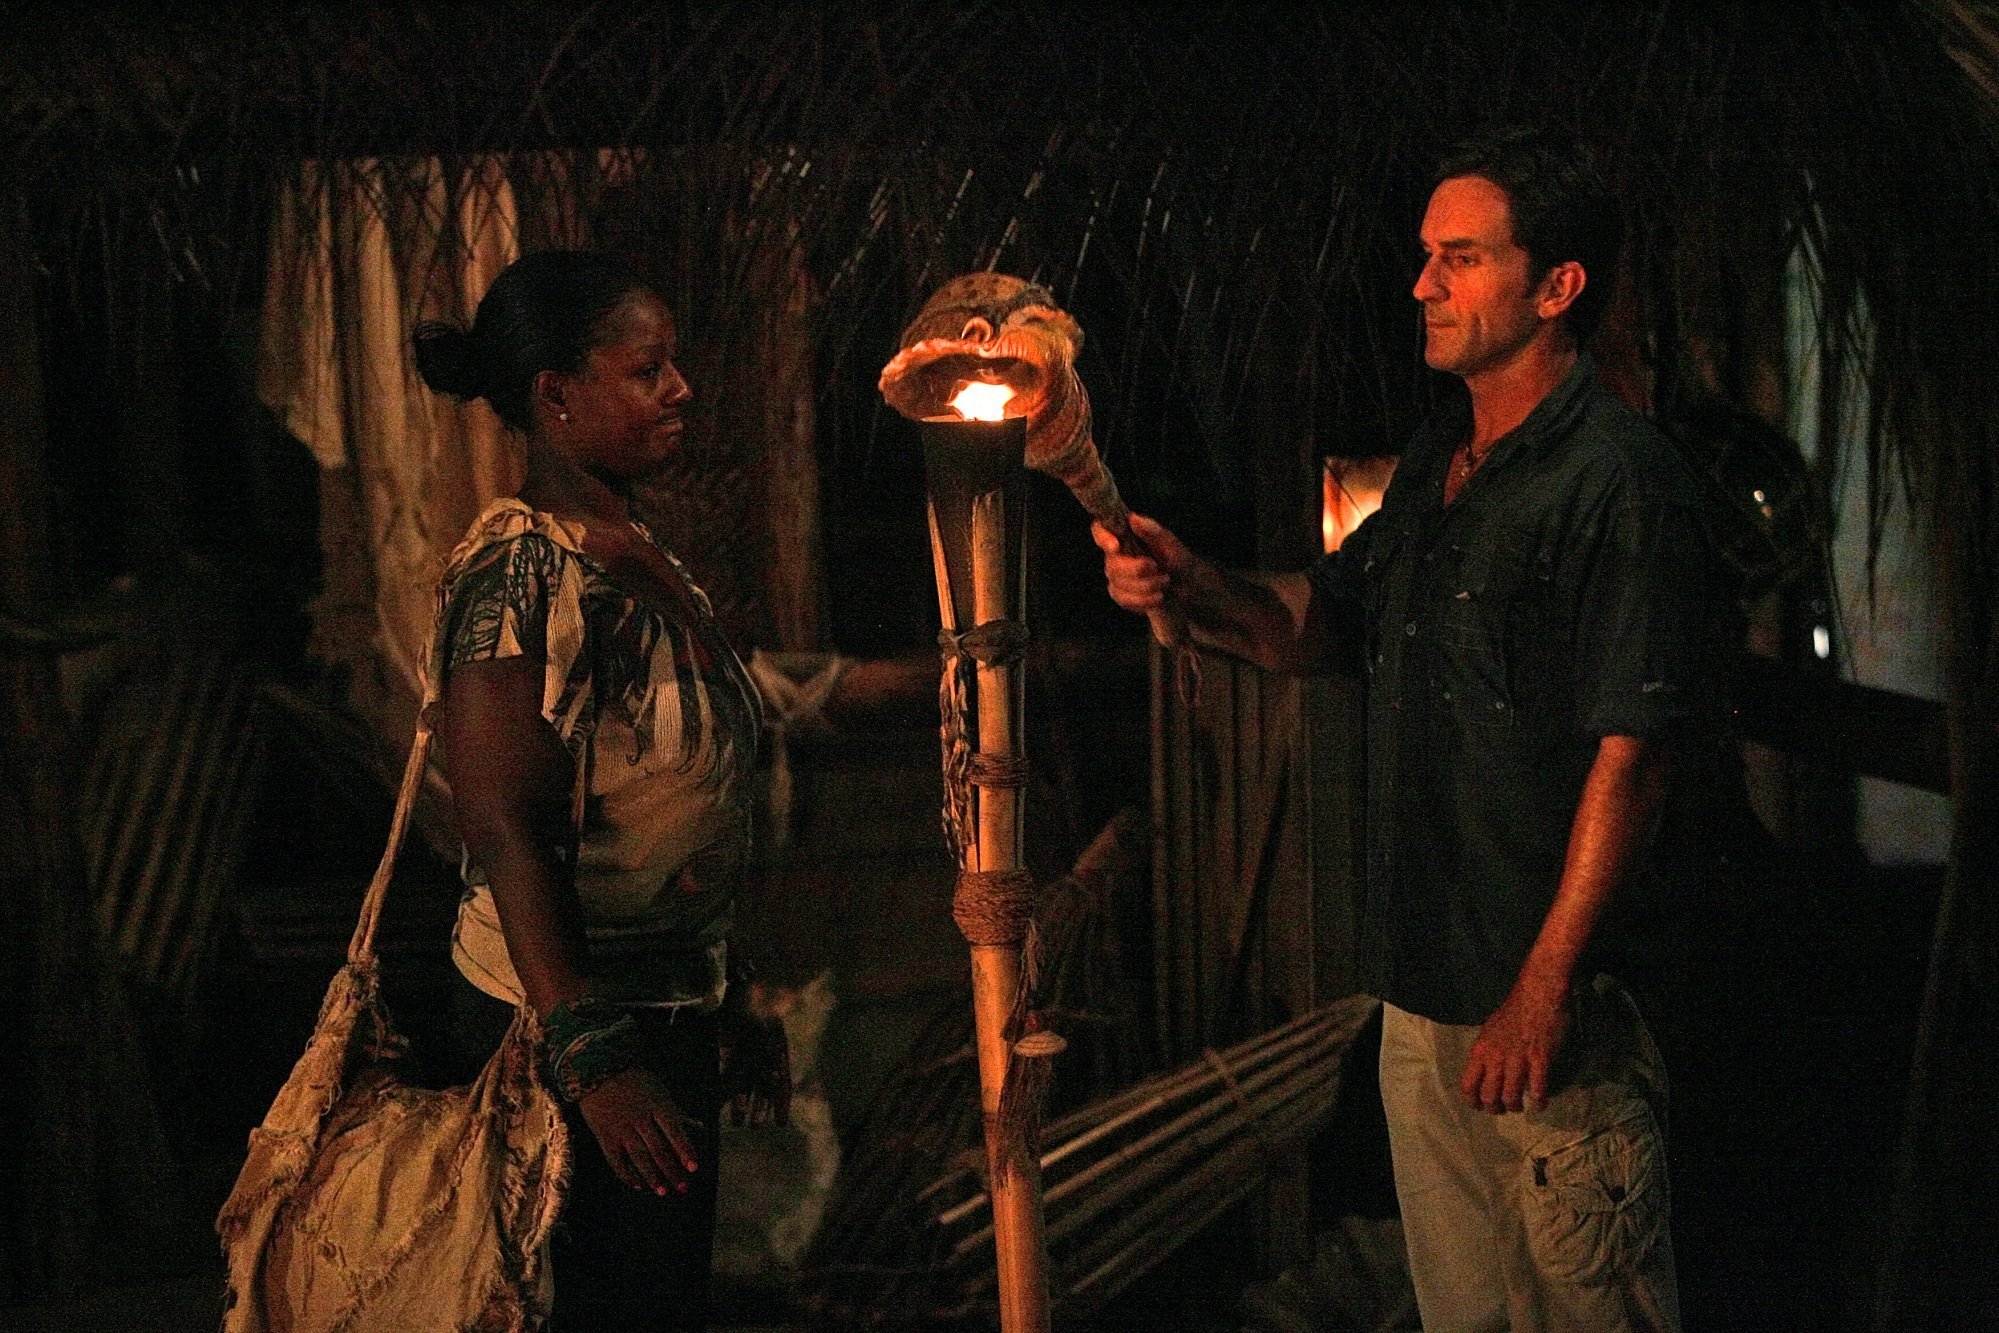 Jeff Probst snuffing out Cirie Fields' torch on 'Survivor'